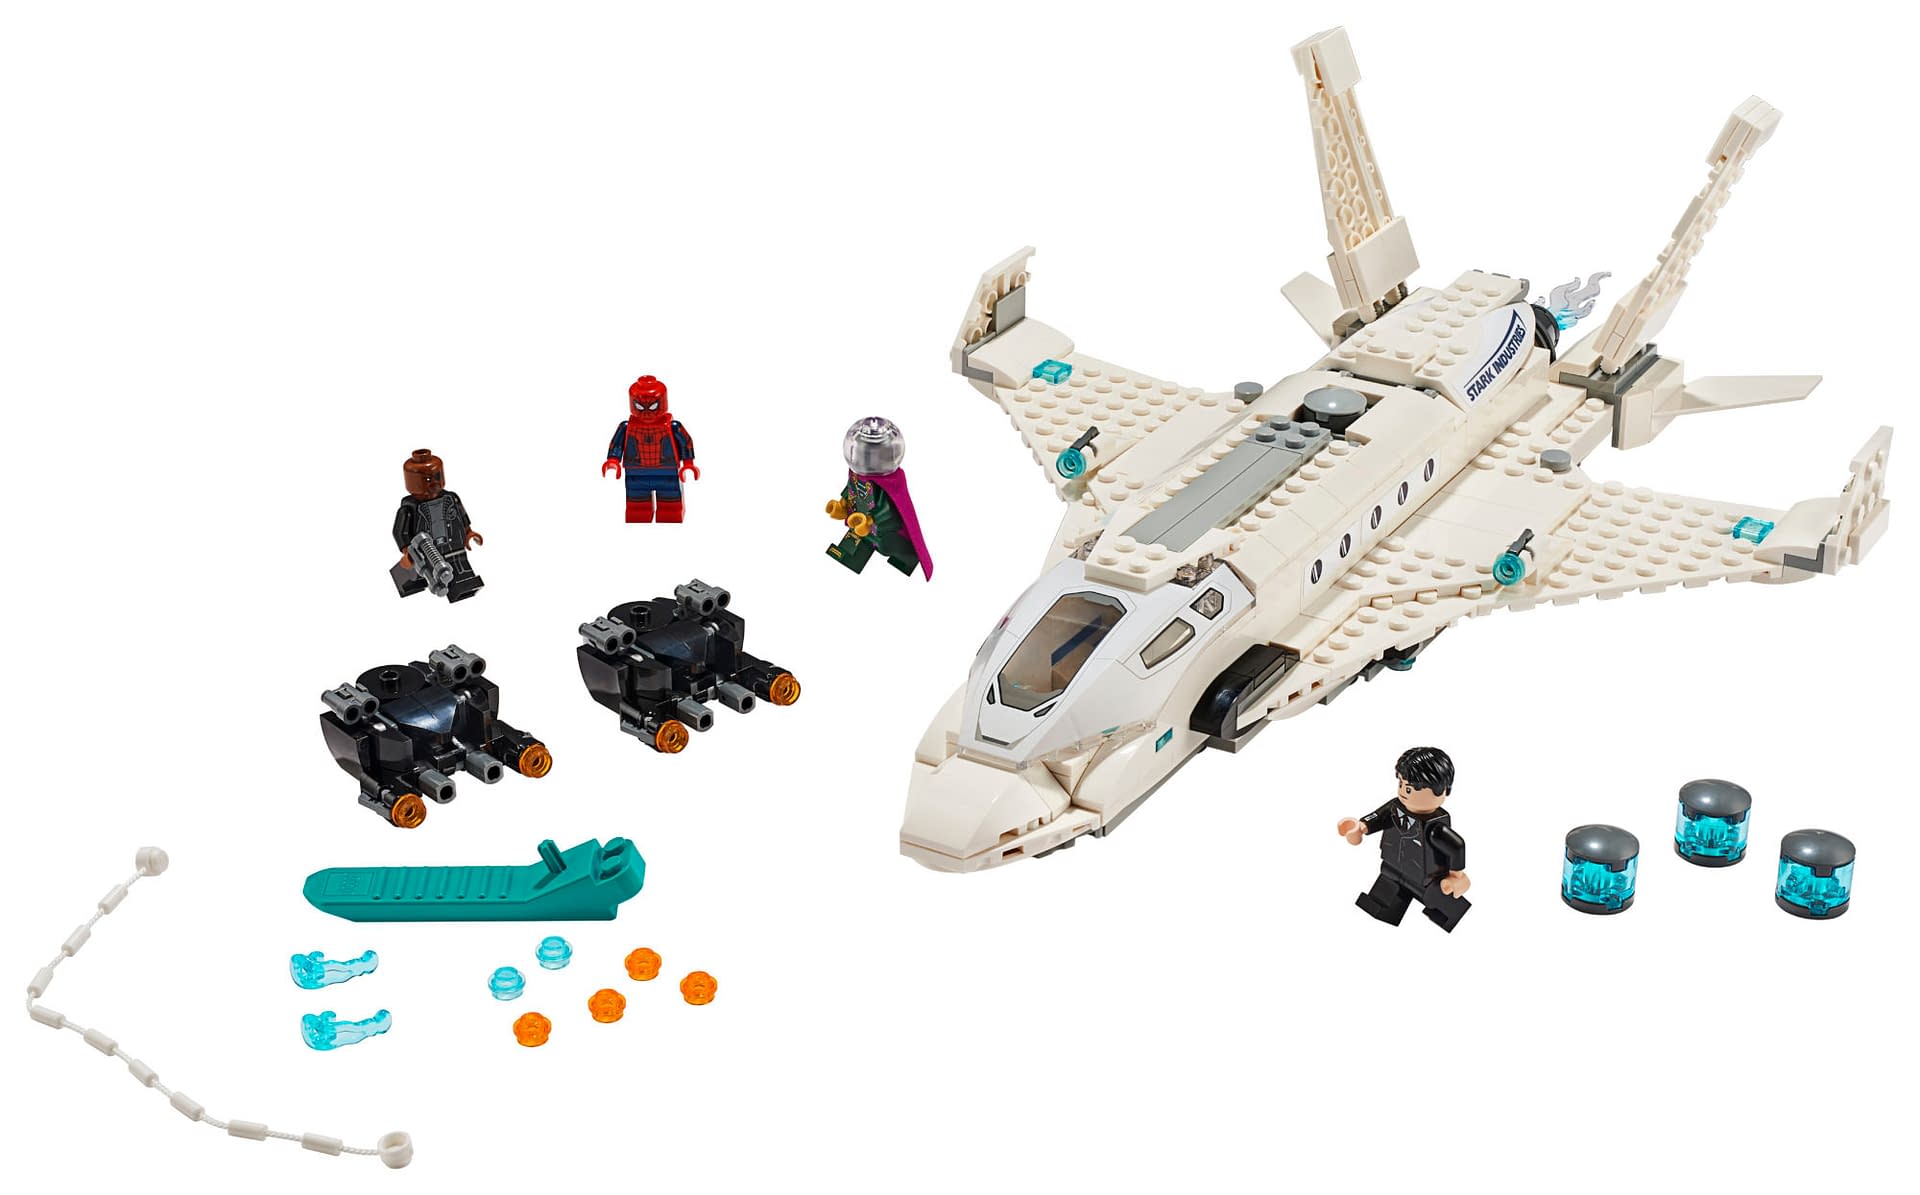 Three New Awesome Spider-Man: Far From Home LEGO Sets Coming Soon